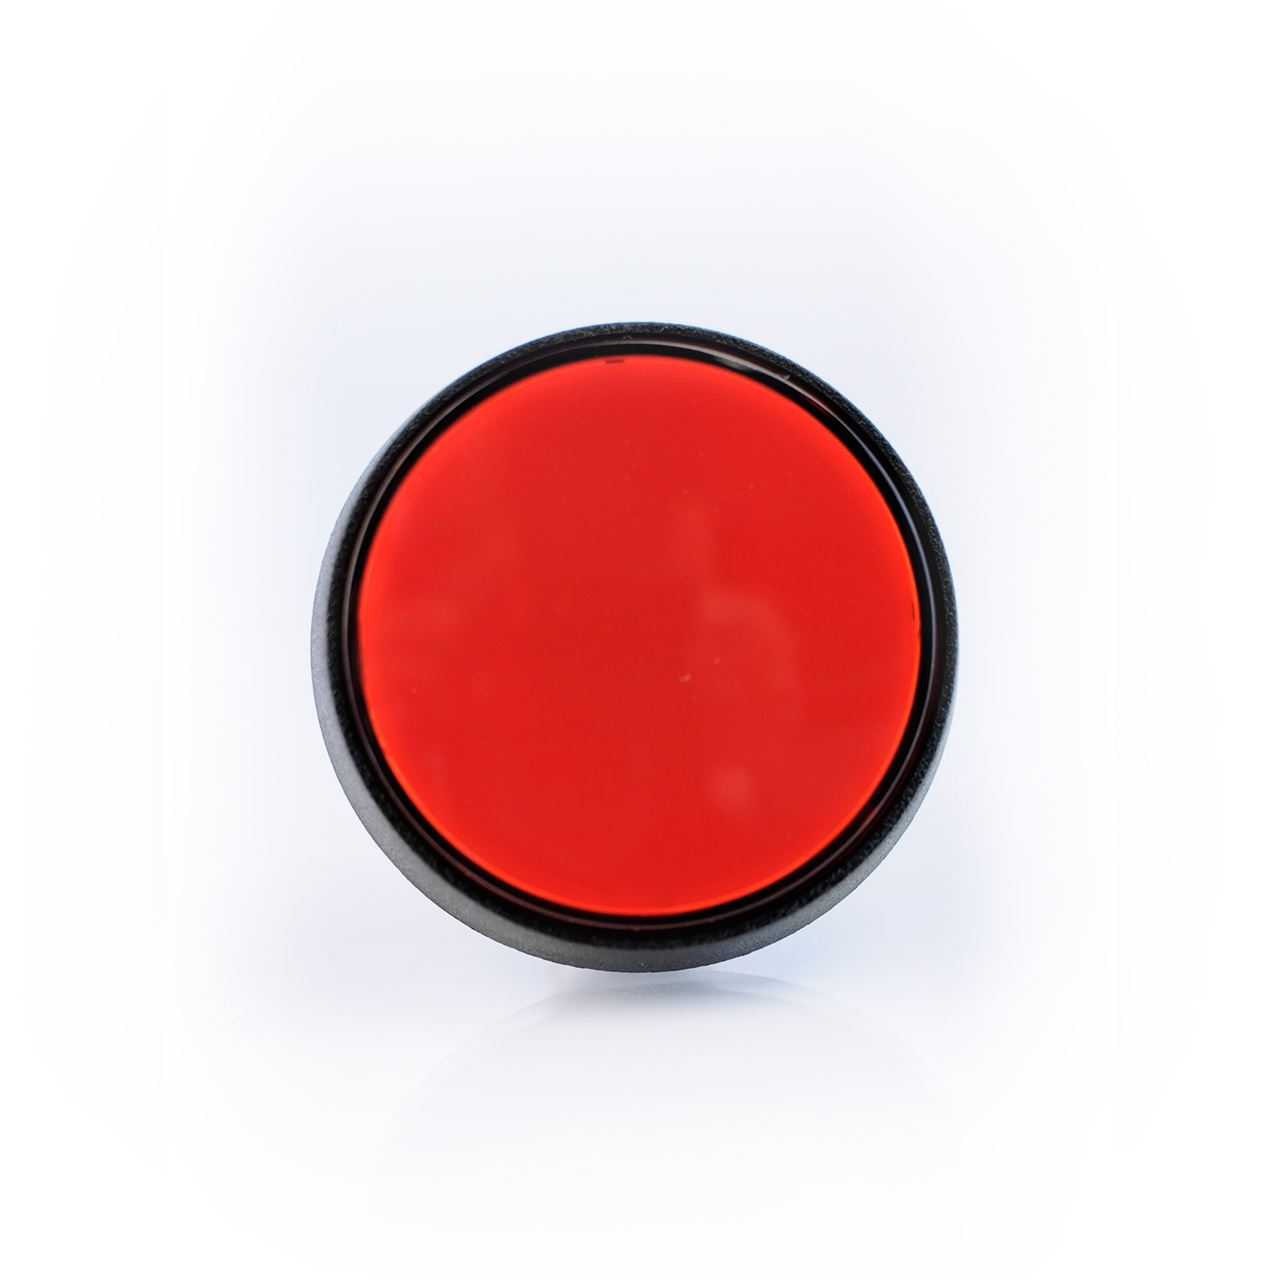 Large Red Plastic Mechanical Push Button